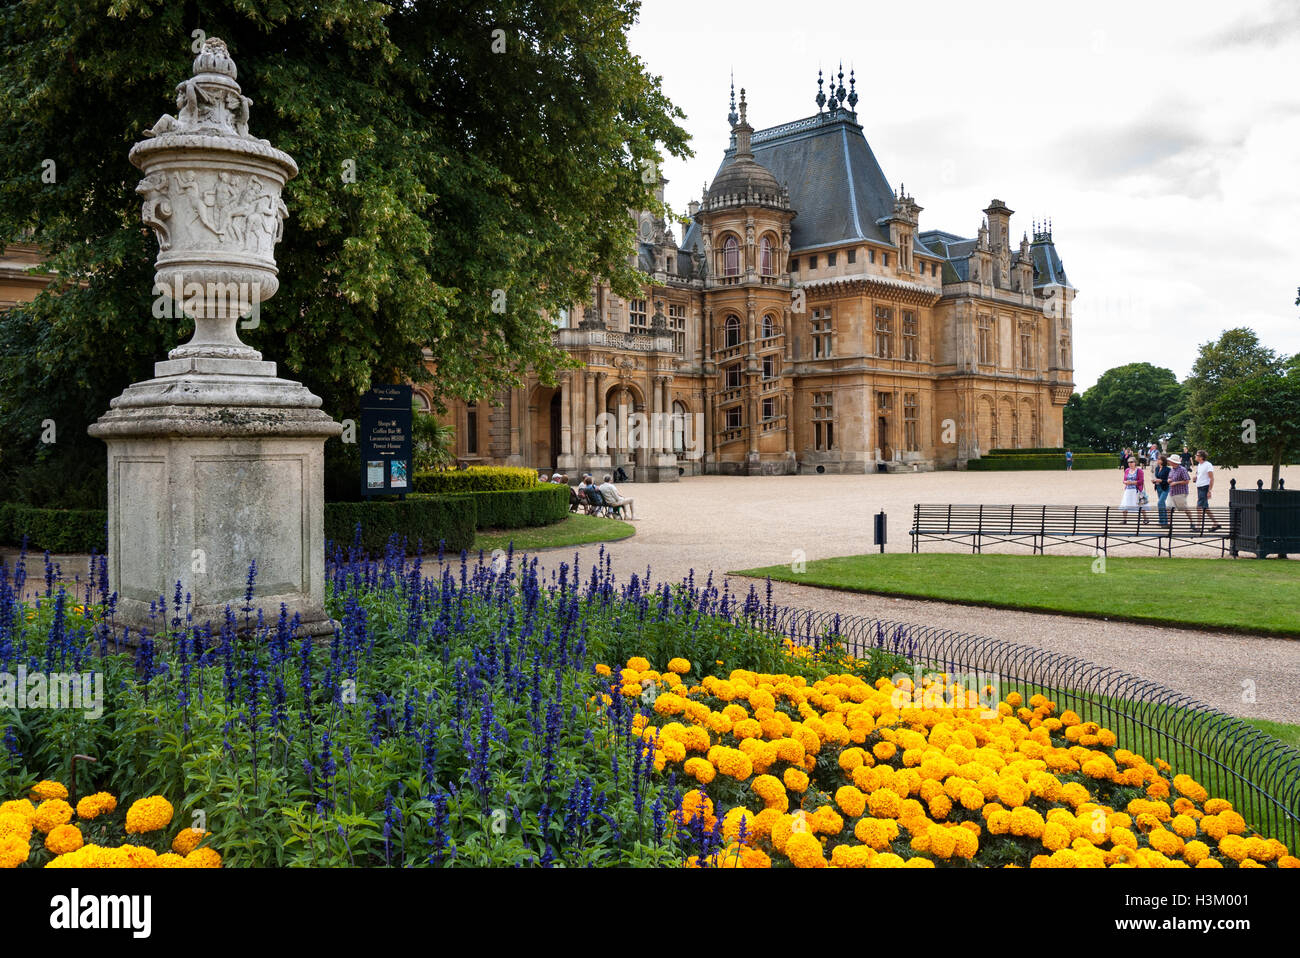 Waddesdon Manor House and Gardens, Buckinghamshire, Angleterre Banque D'Images